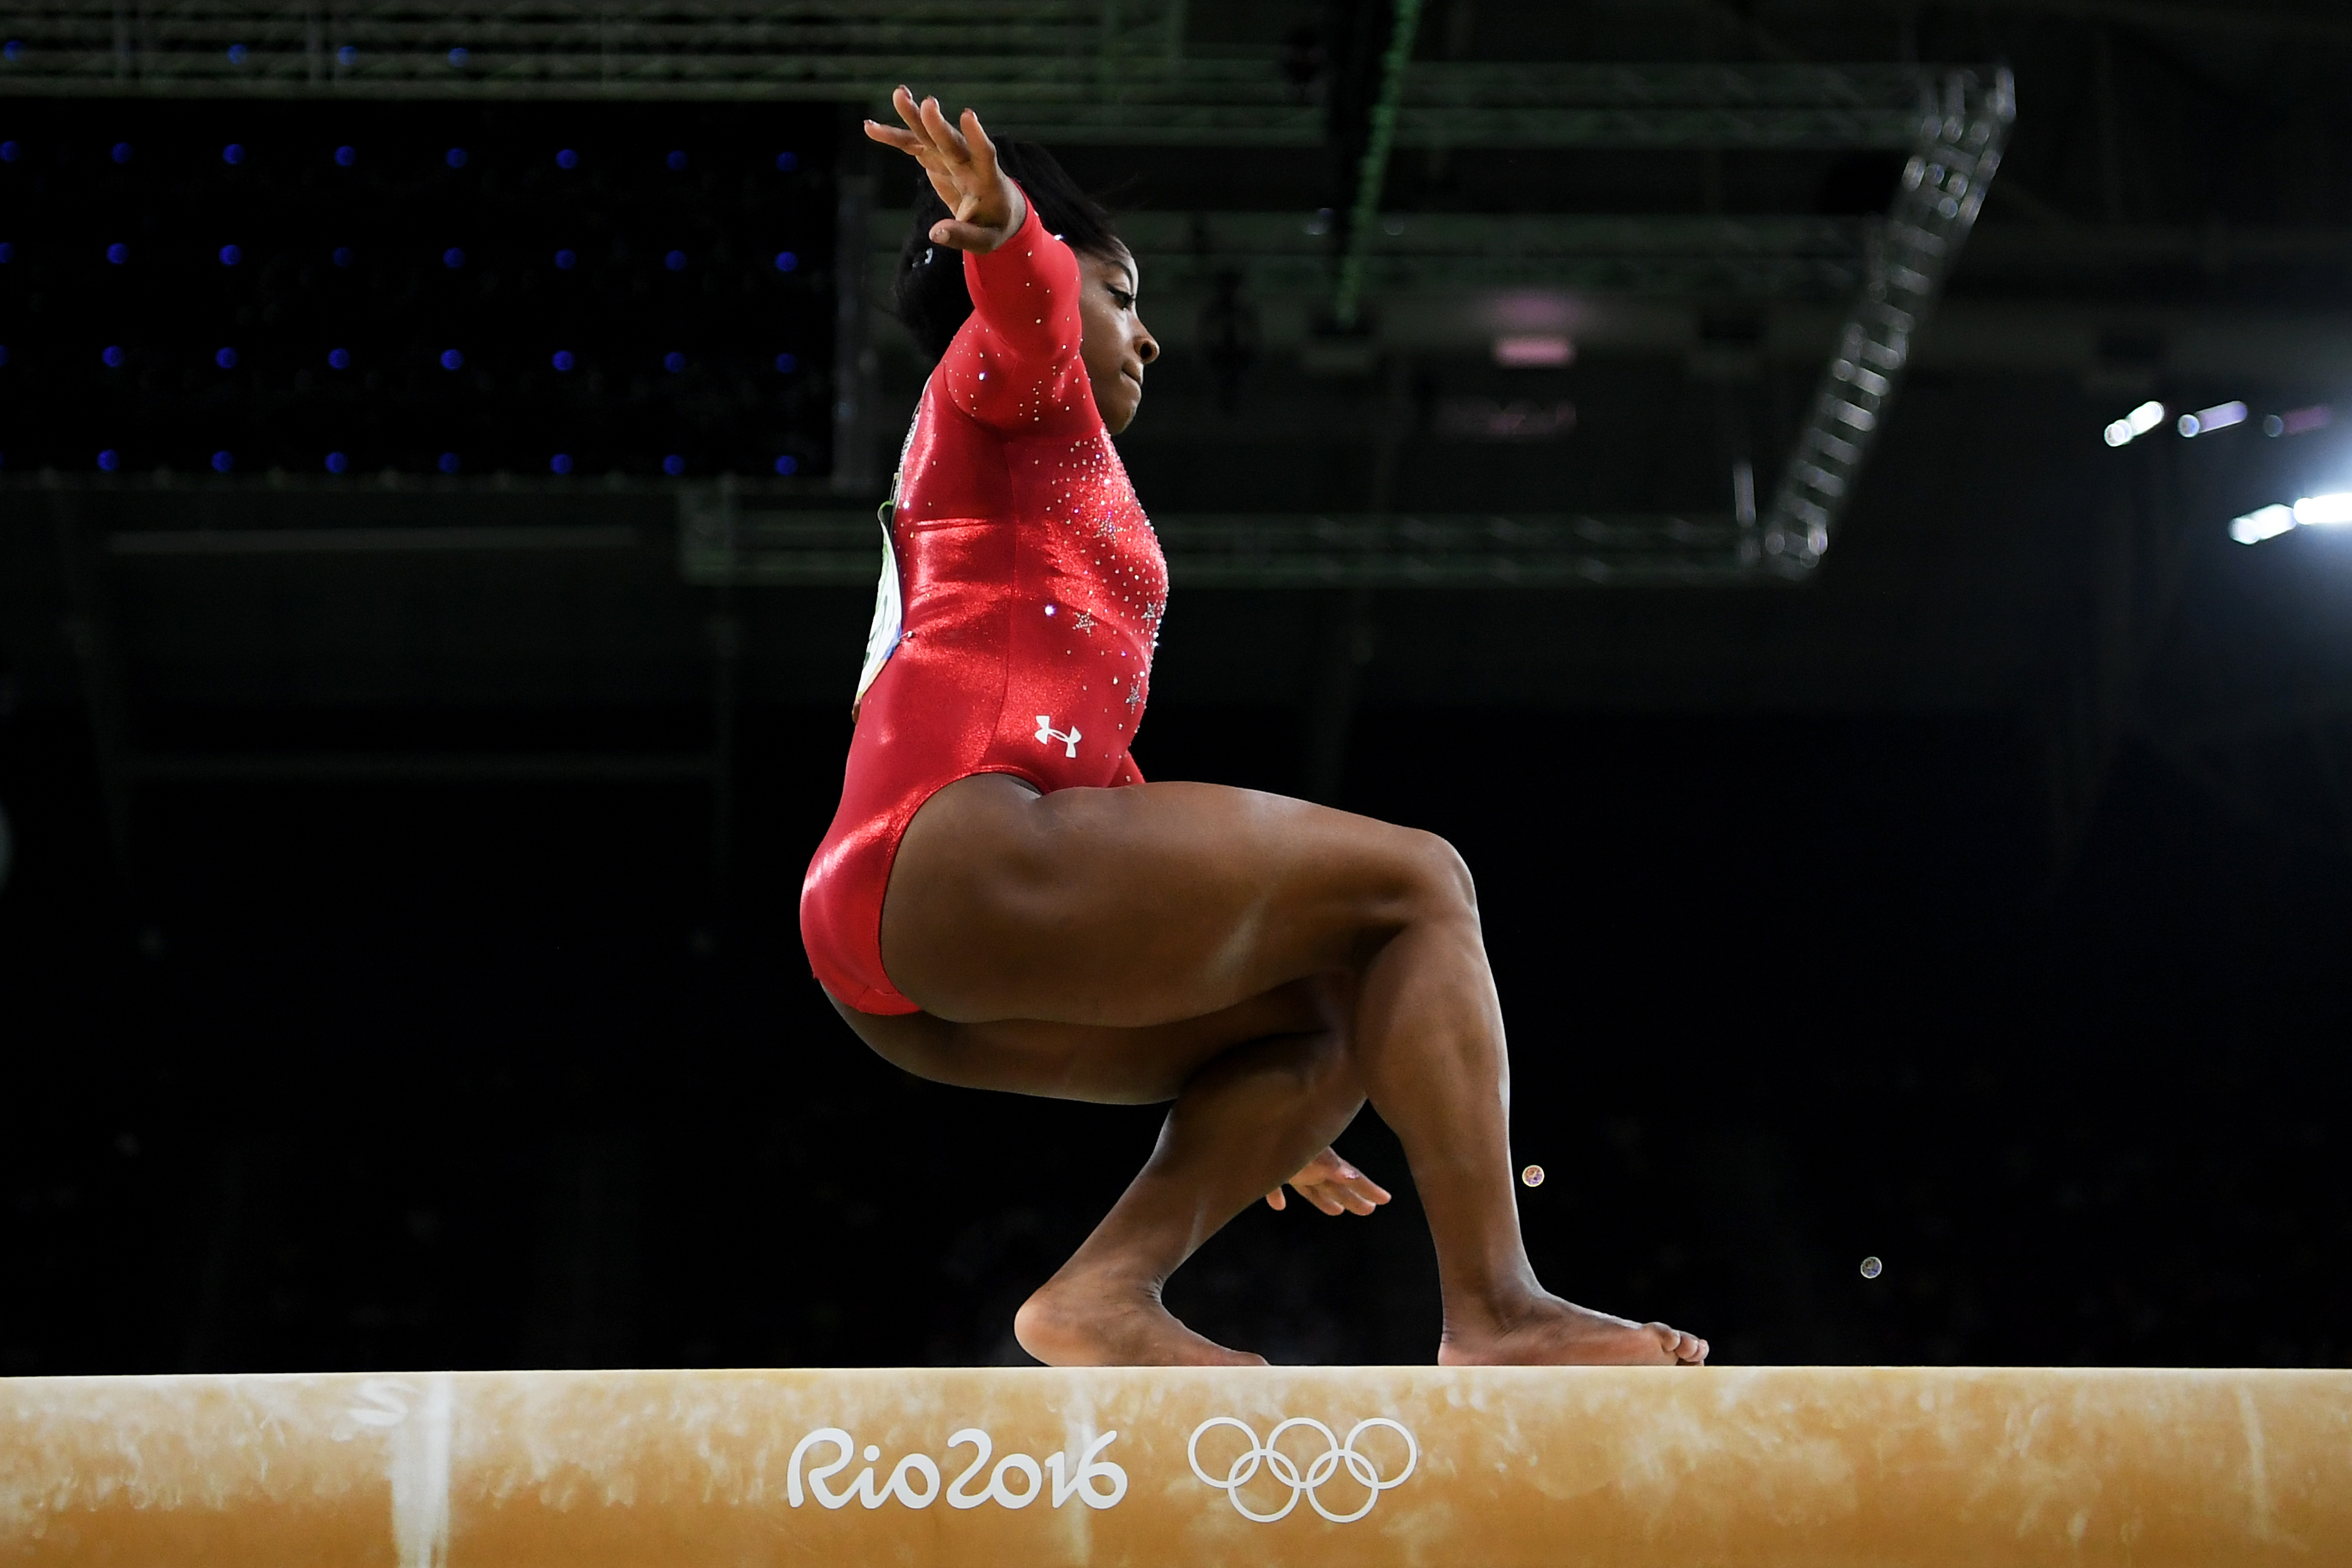 Watch Simone Biles Balance Beam Routine That Netted Her A Bronze Medal